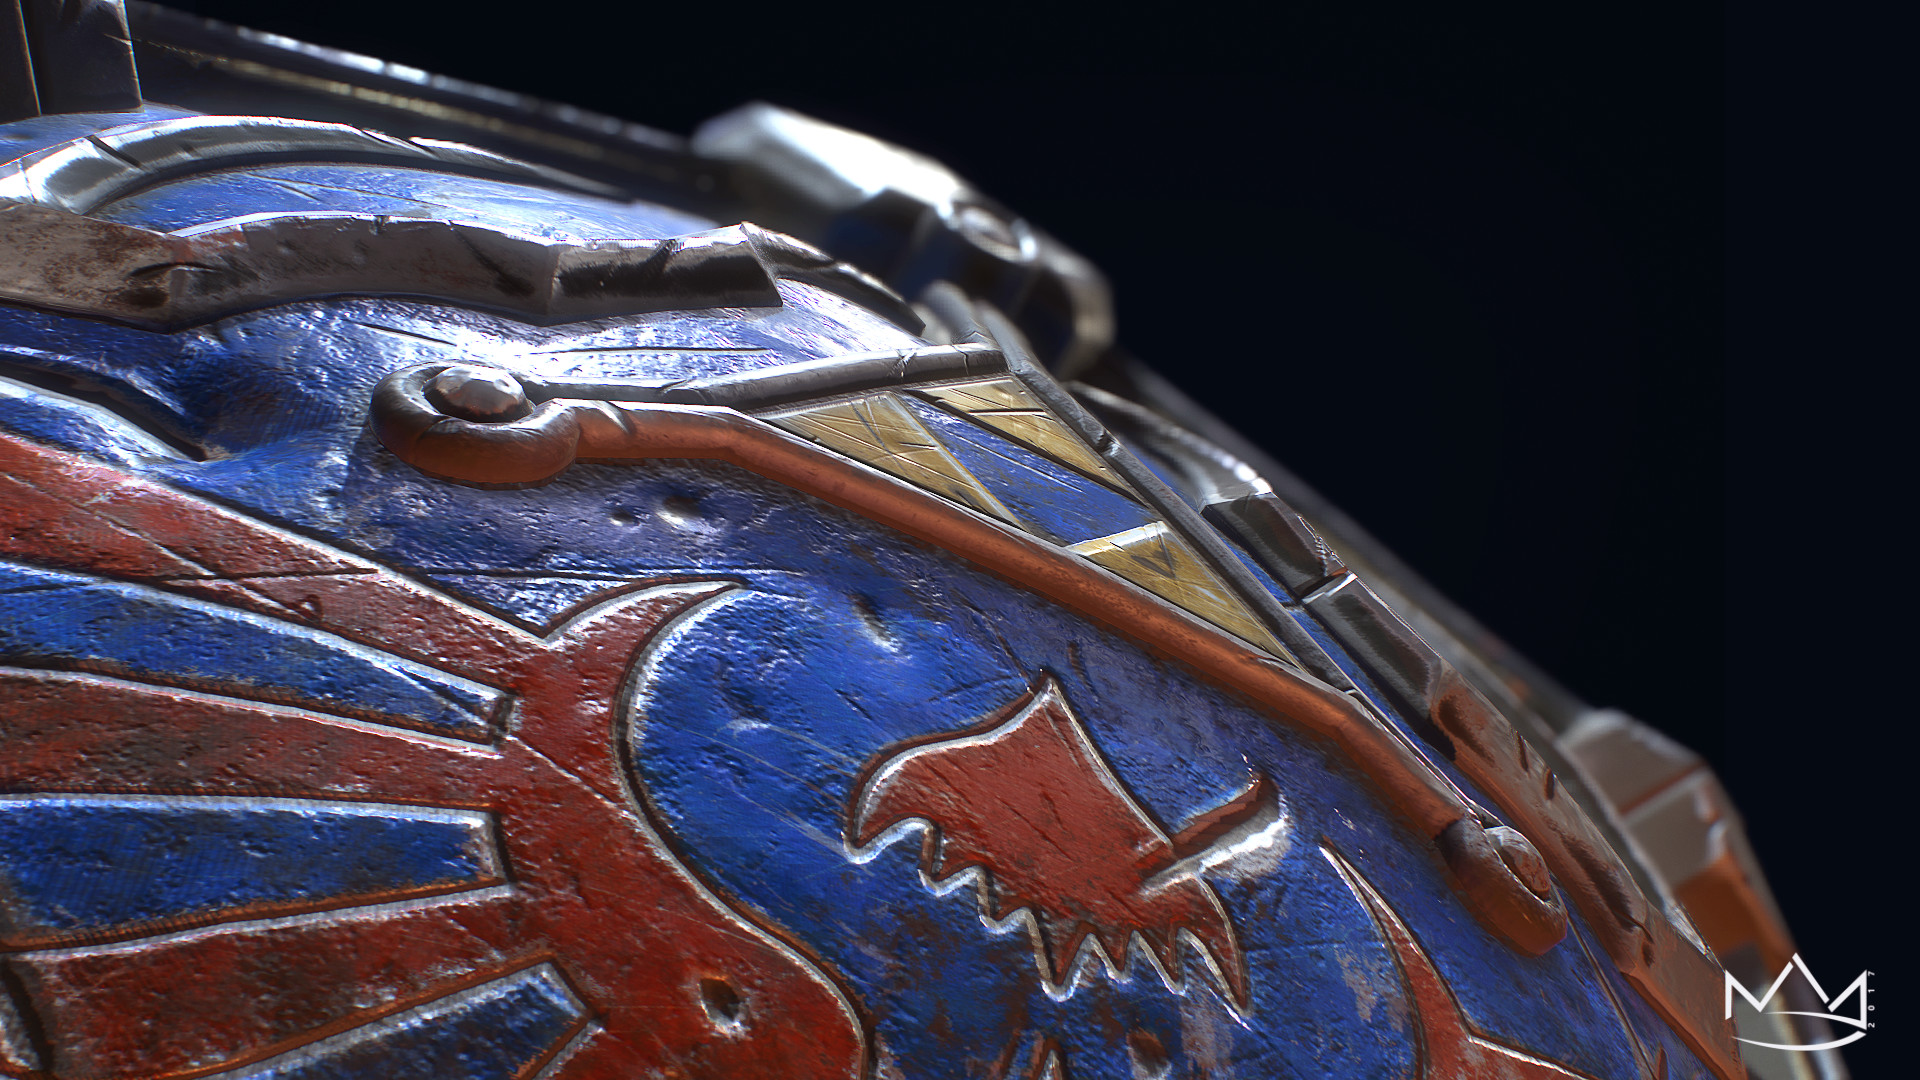 Up Close With The Hylian Shield